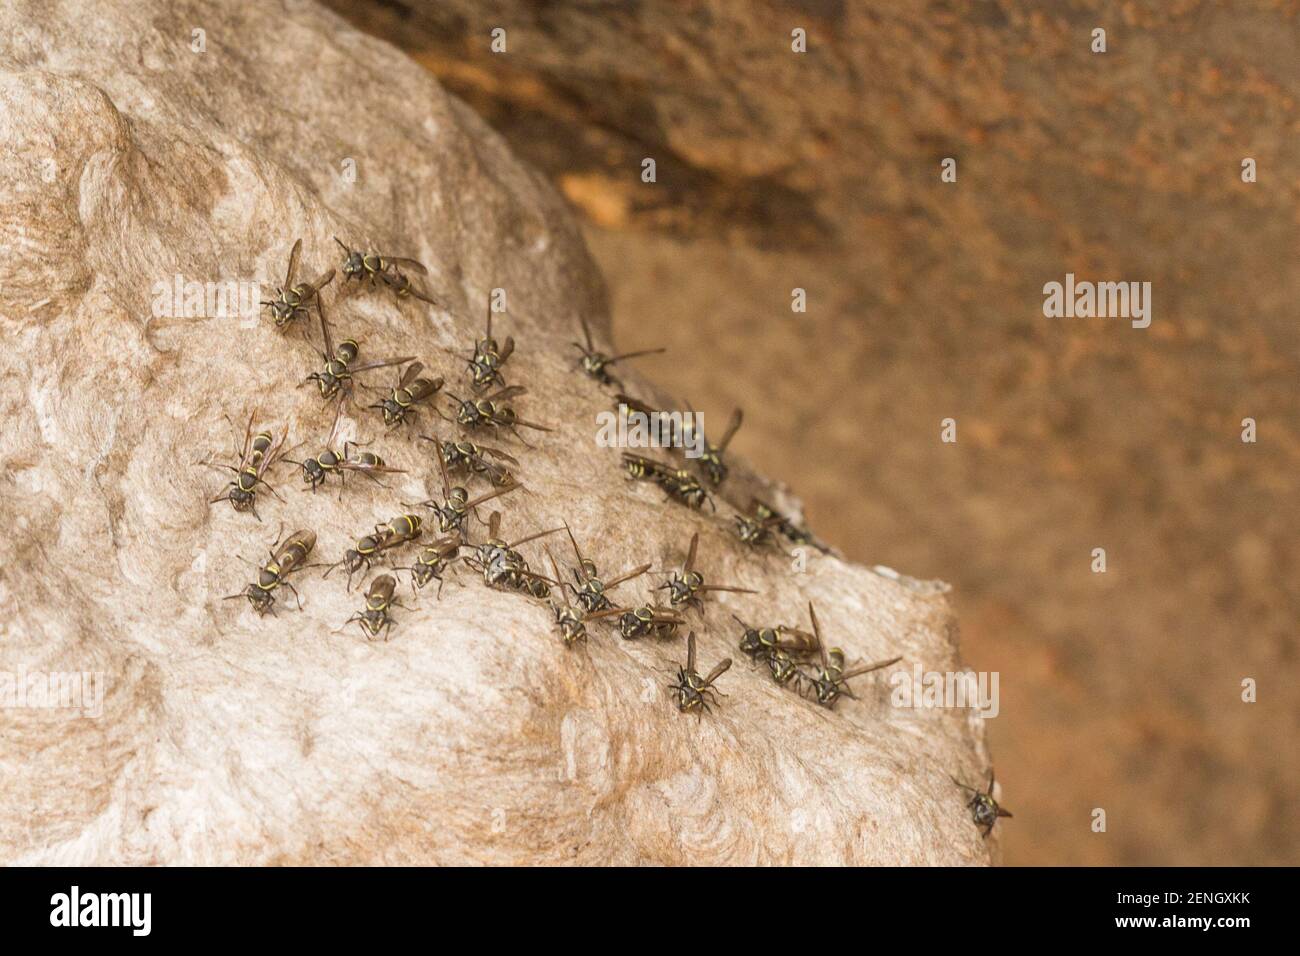 Some wasps in natural habitat close to the Town of Cristalia in Minas Gerais, Brazil Stock Photo